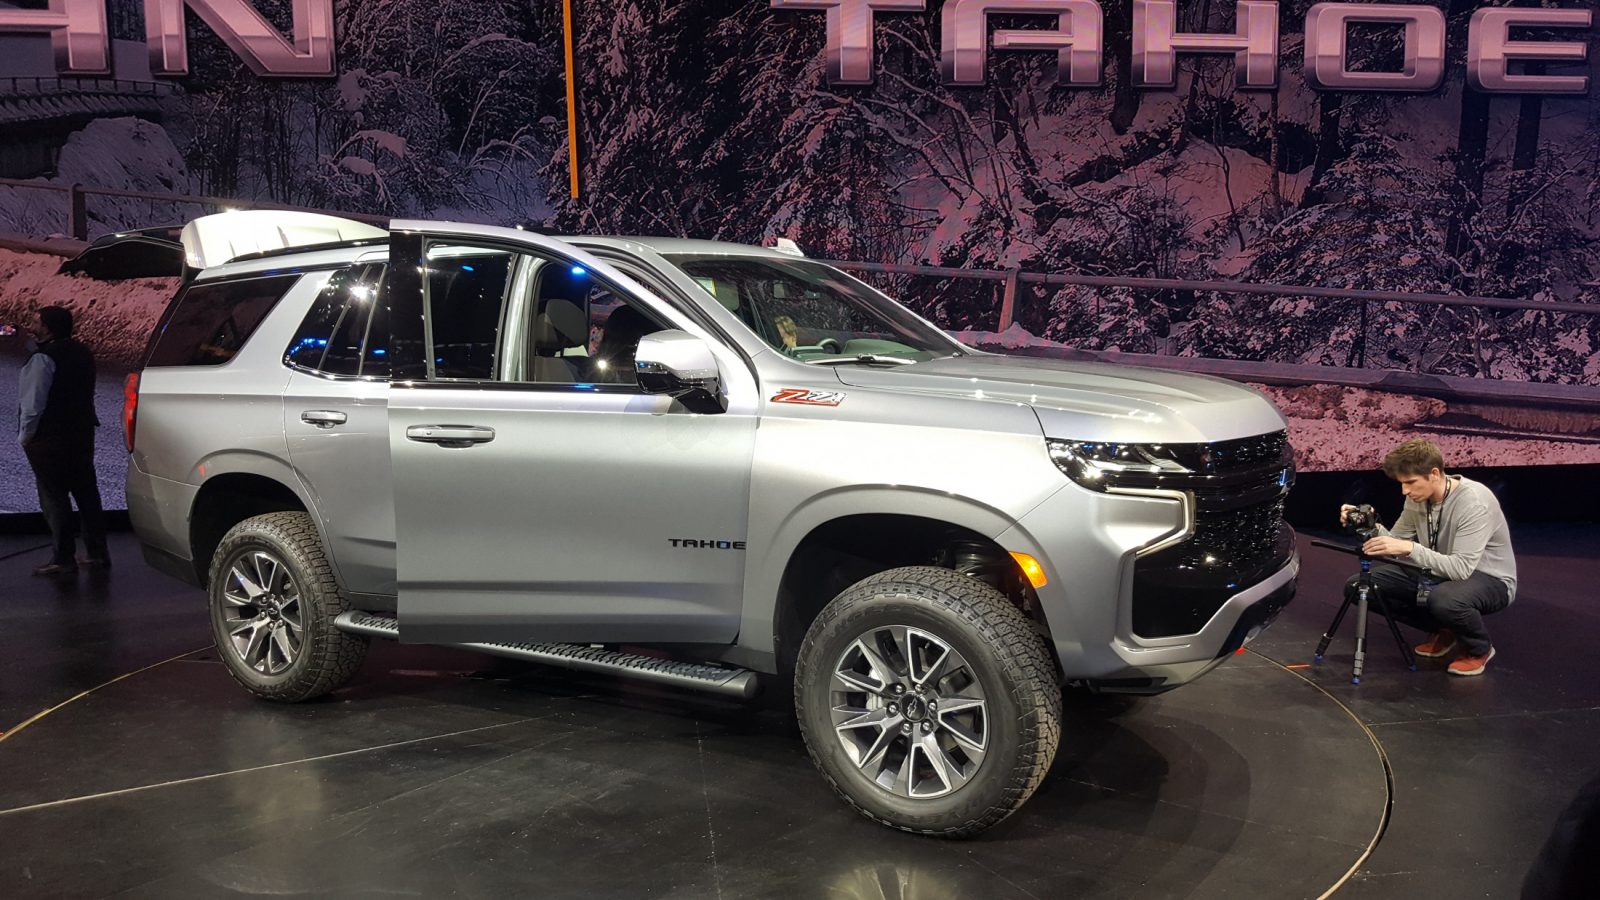 2021 Chevrolet Tahoe Z71 Busts The Trails Has Sequoia Trd Pro In